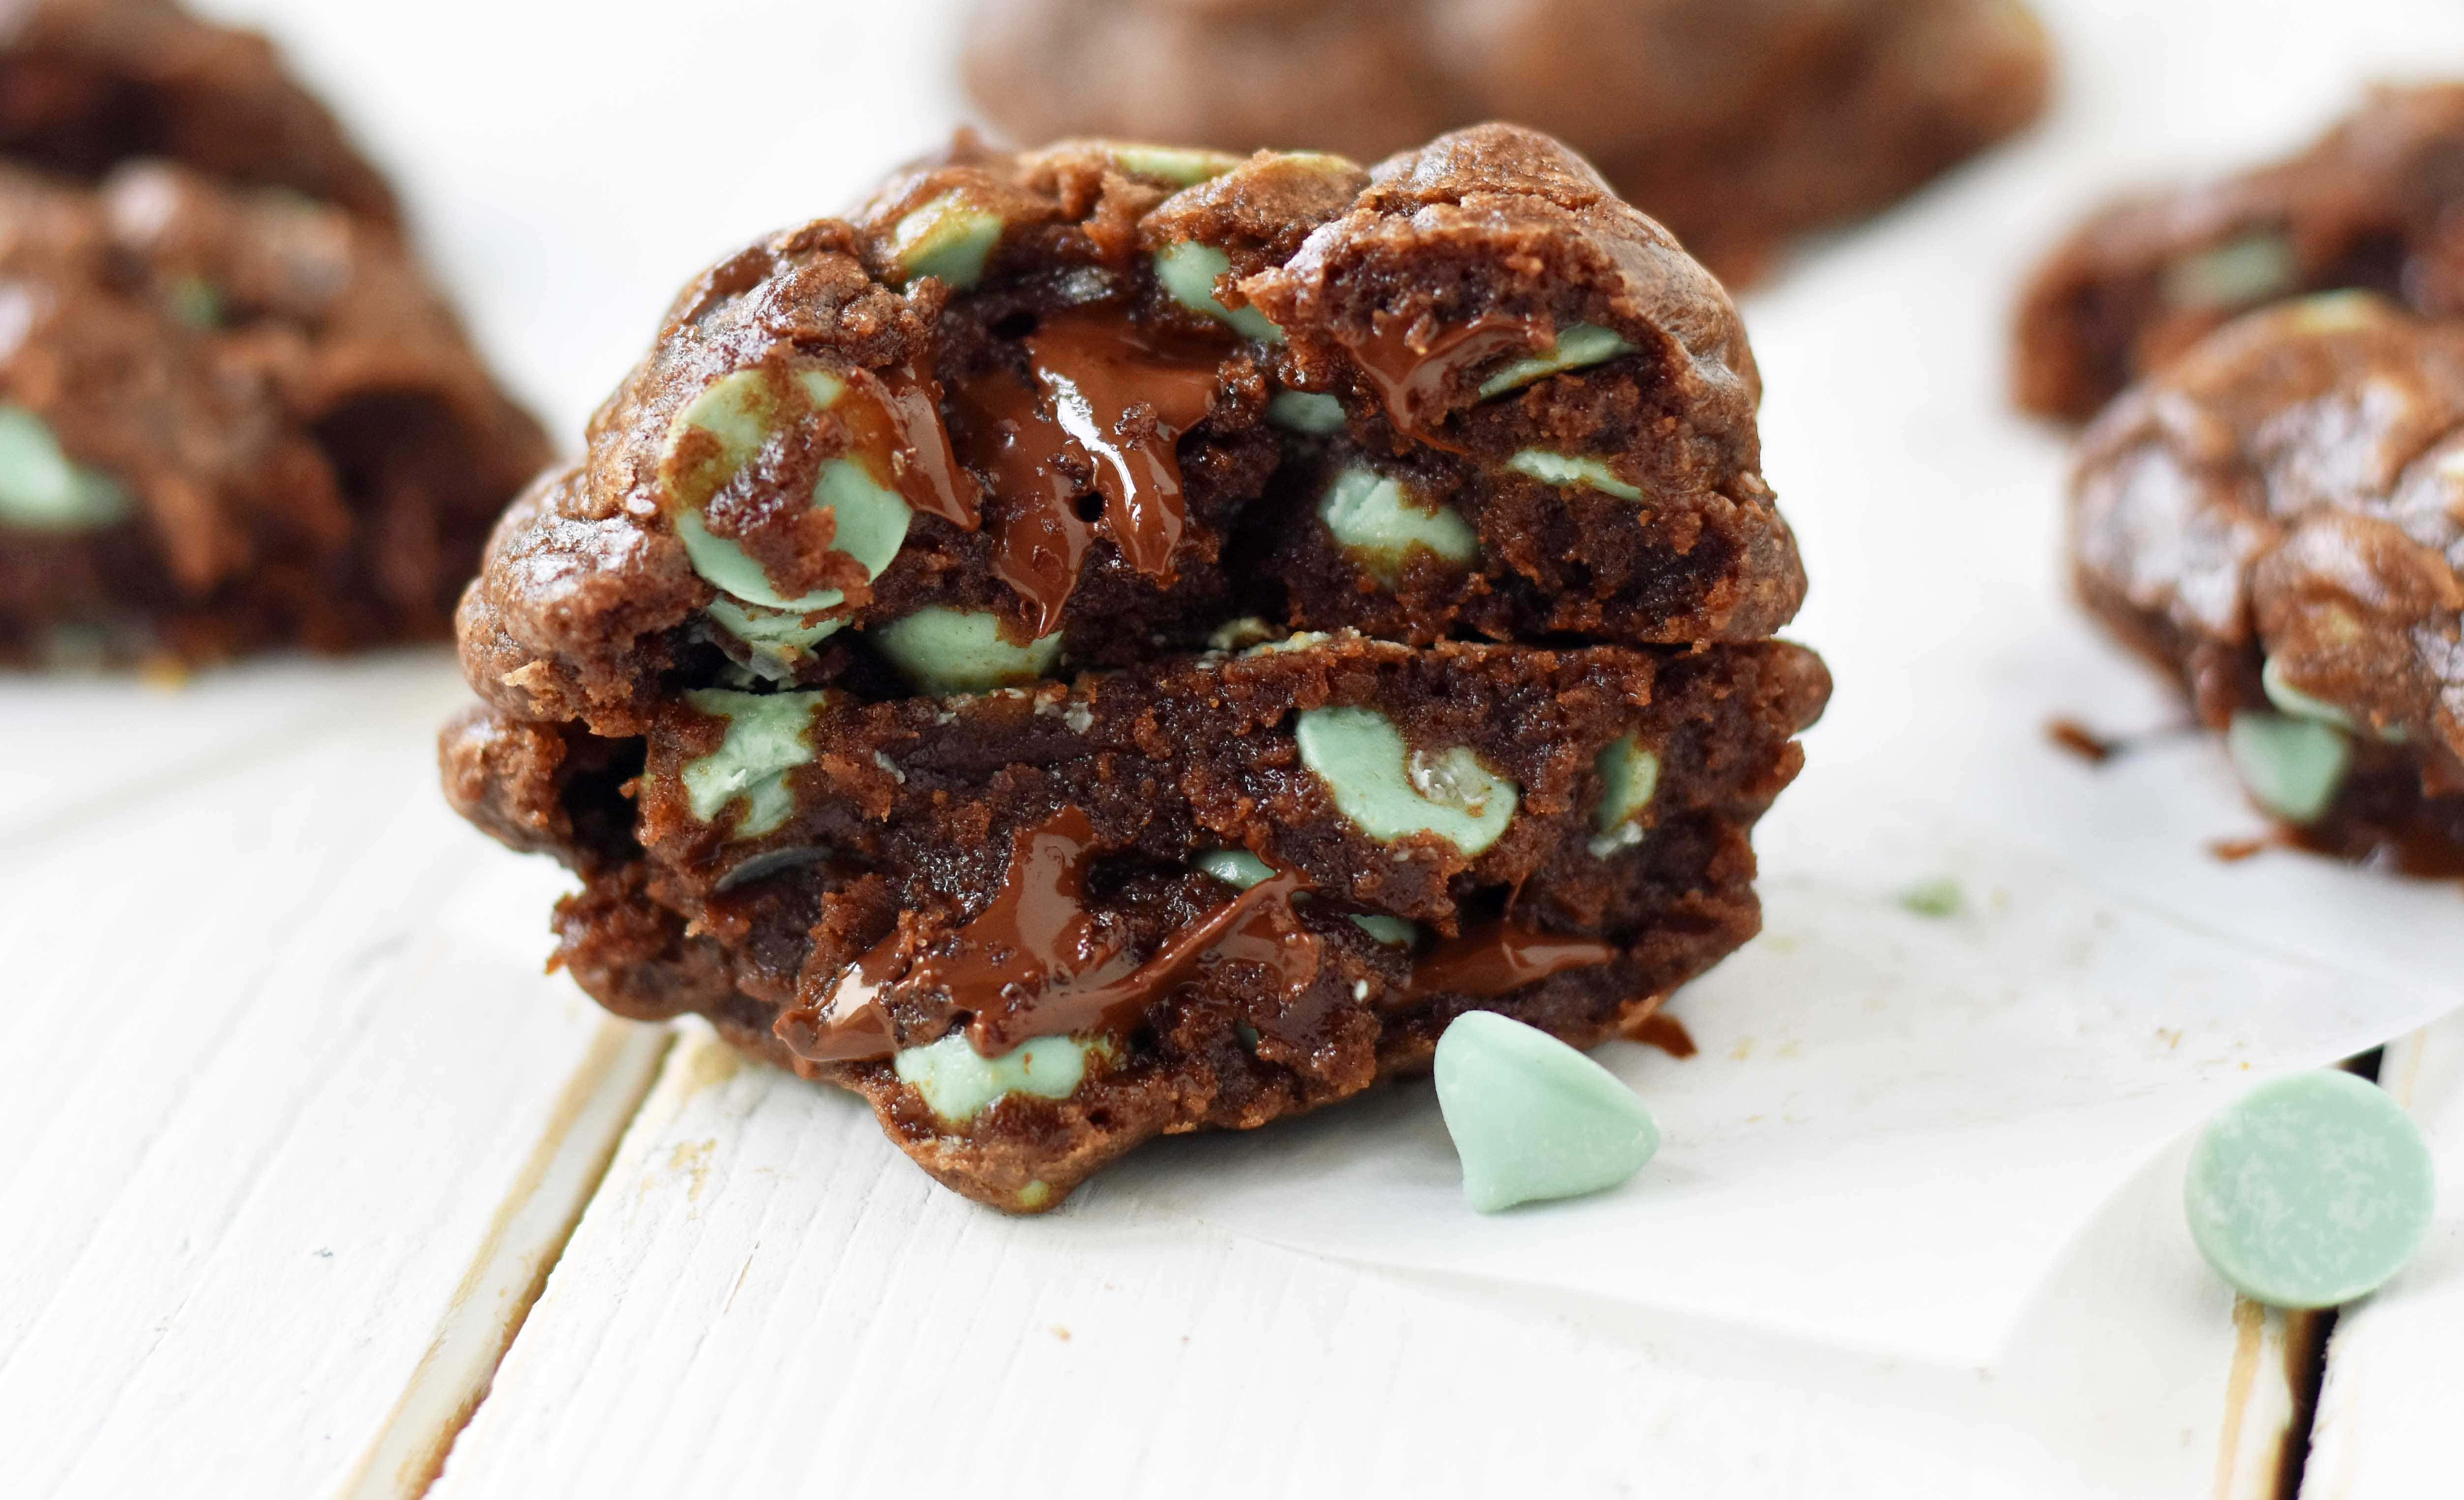 Chocolate Mint Chip Cookies are made with a rich chewy double chocolate cookie with silky smooth mint chips. A perfect chocolate mint cookie! www.modernhoney.com